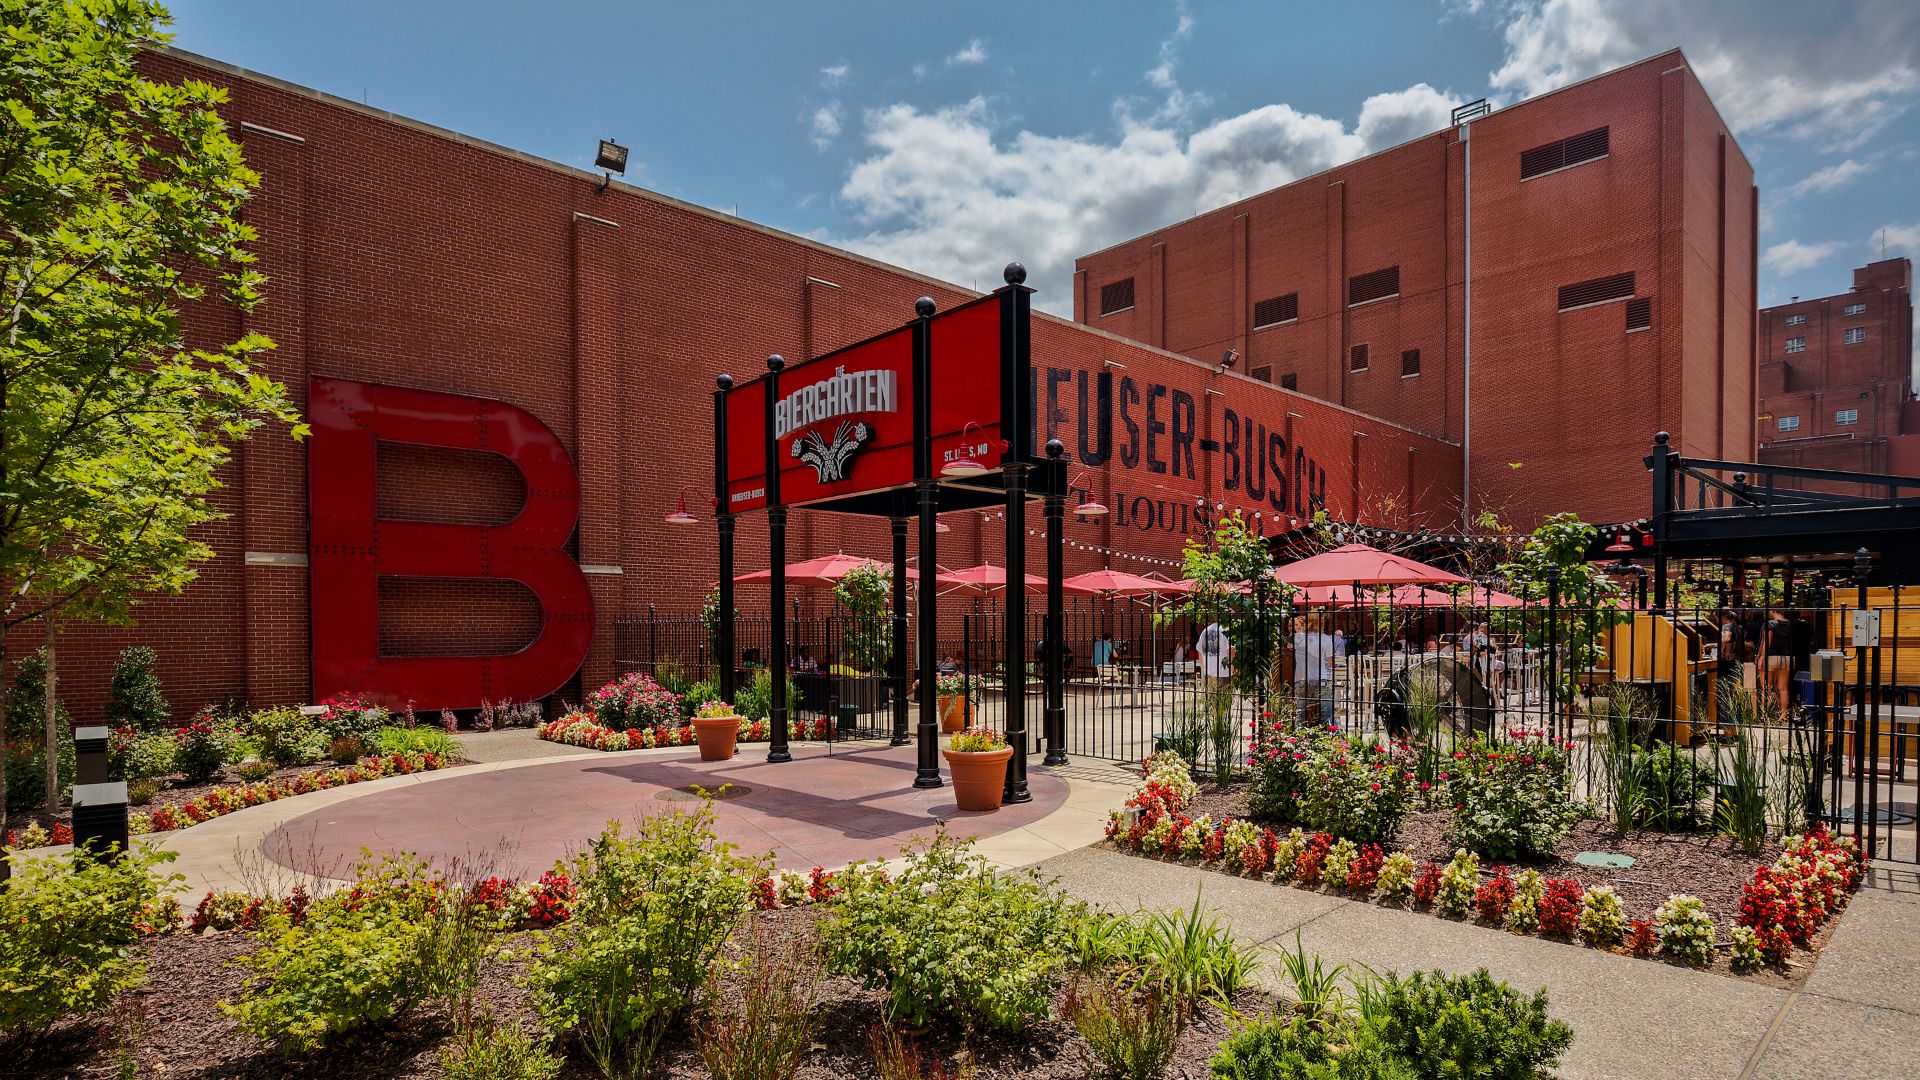 At the Anheuser-Busch Biergarten, you can enjoy a cold one on the house.